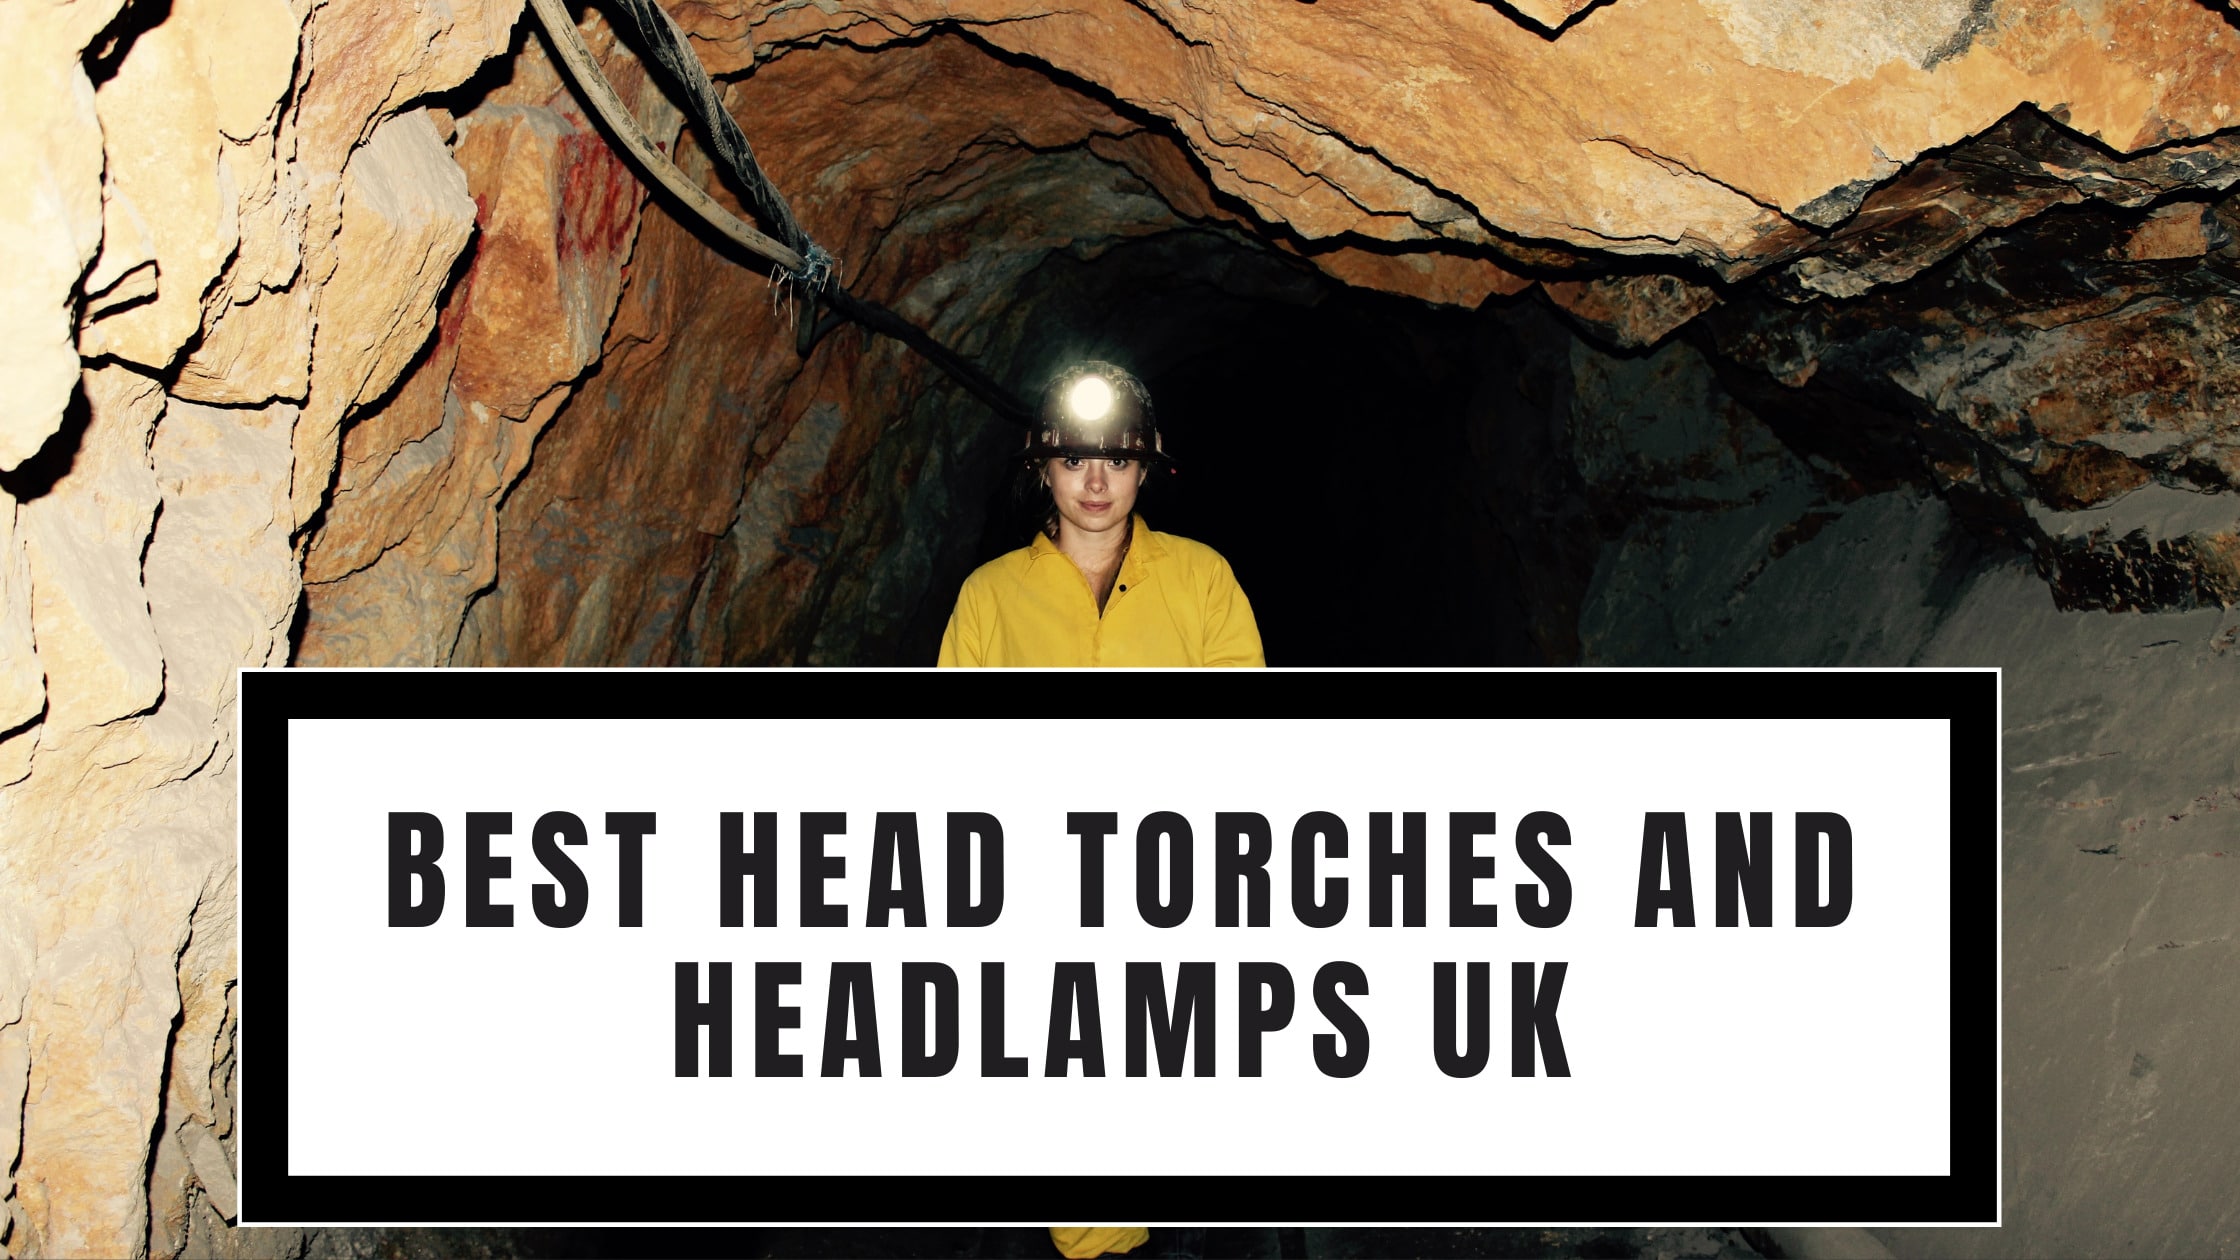 Best Head Torches and Headlamps UK